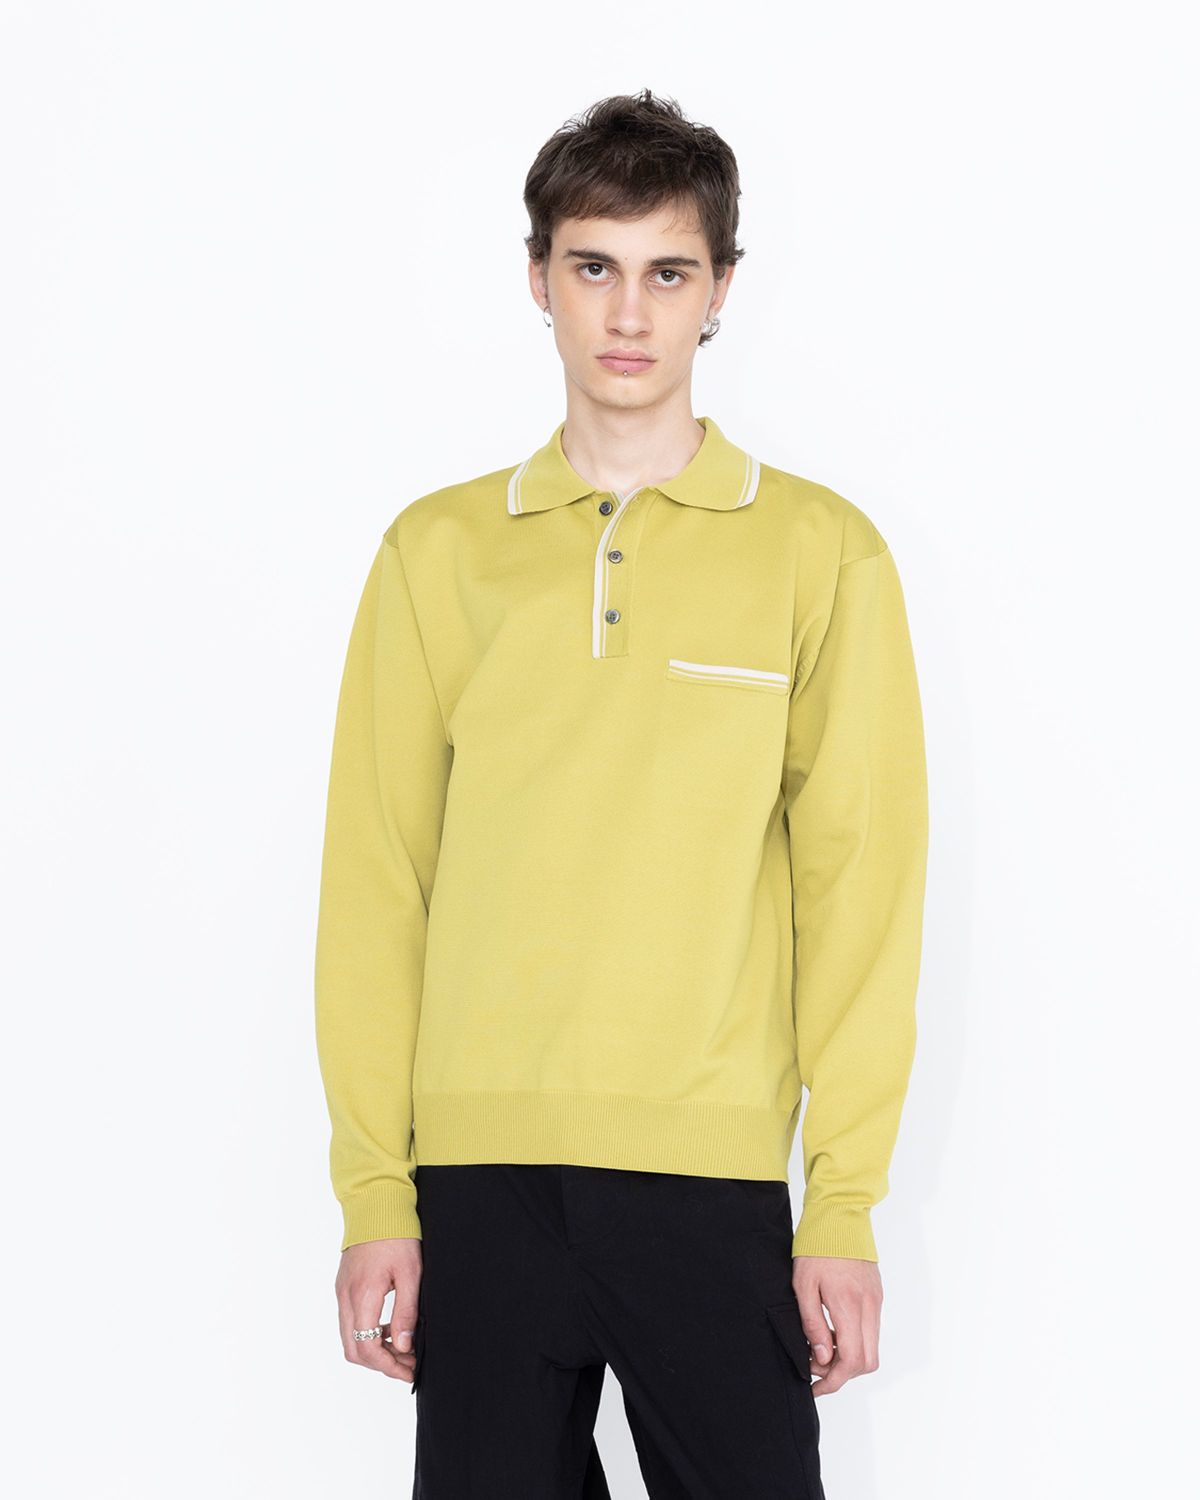 Highsnobiety HS05 – Long Sleeves Knit Polo Green - Longsleeves - Green - Image 3